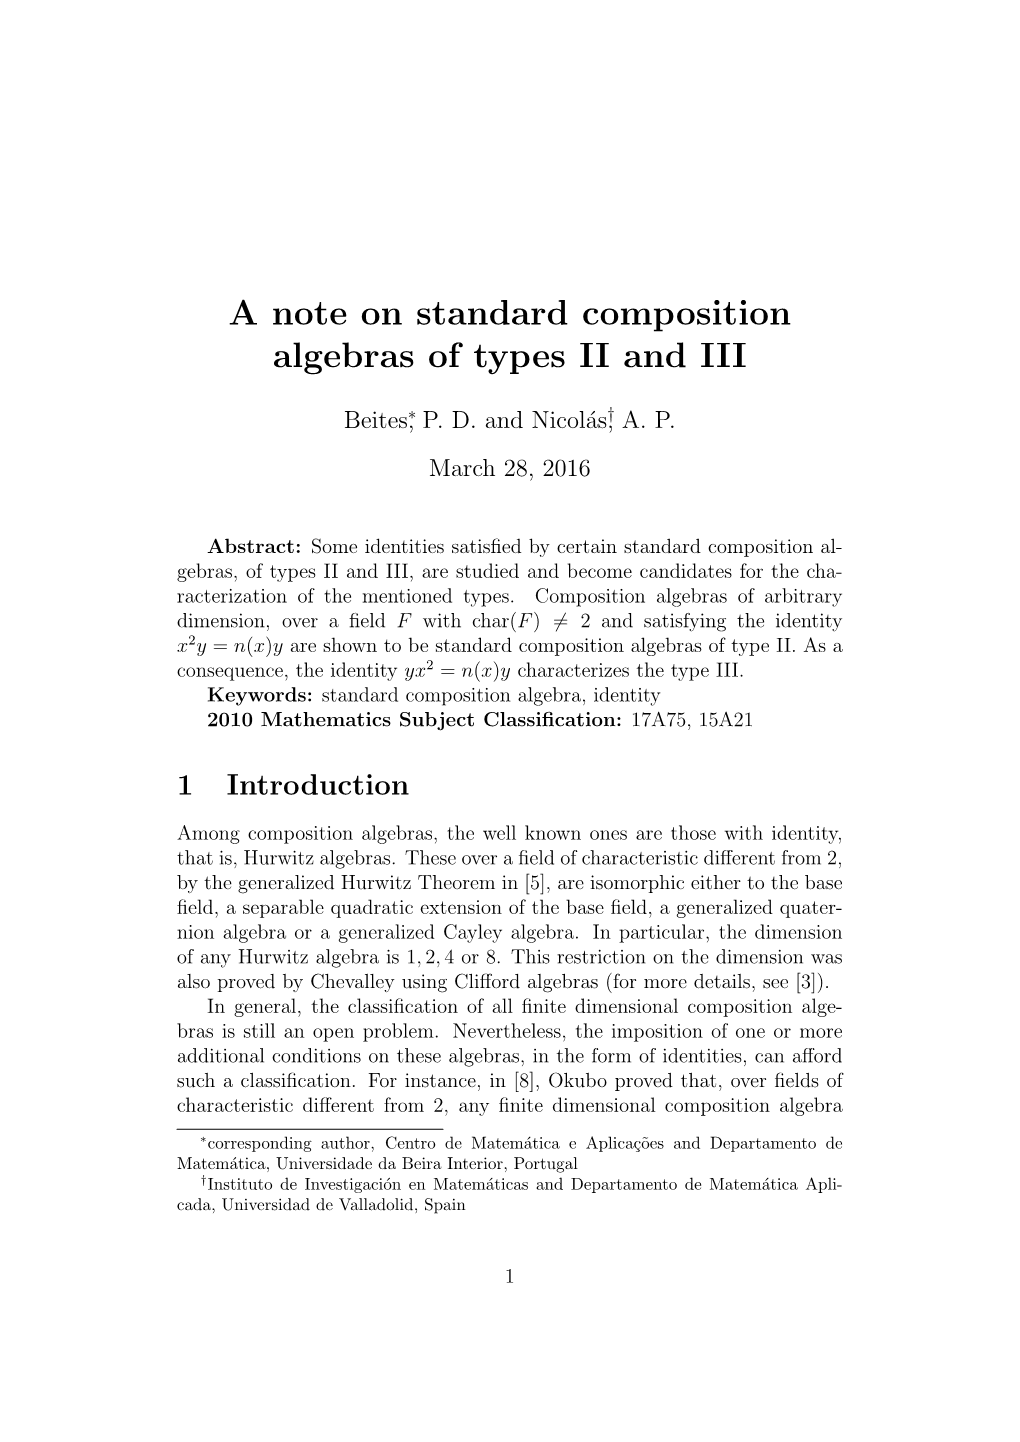 A Note on Standard Composition Algebras of Types II and III